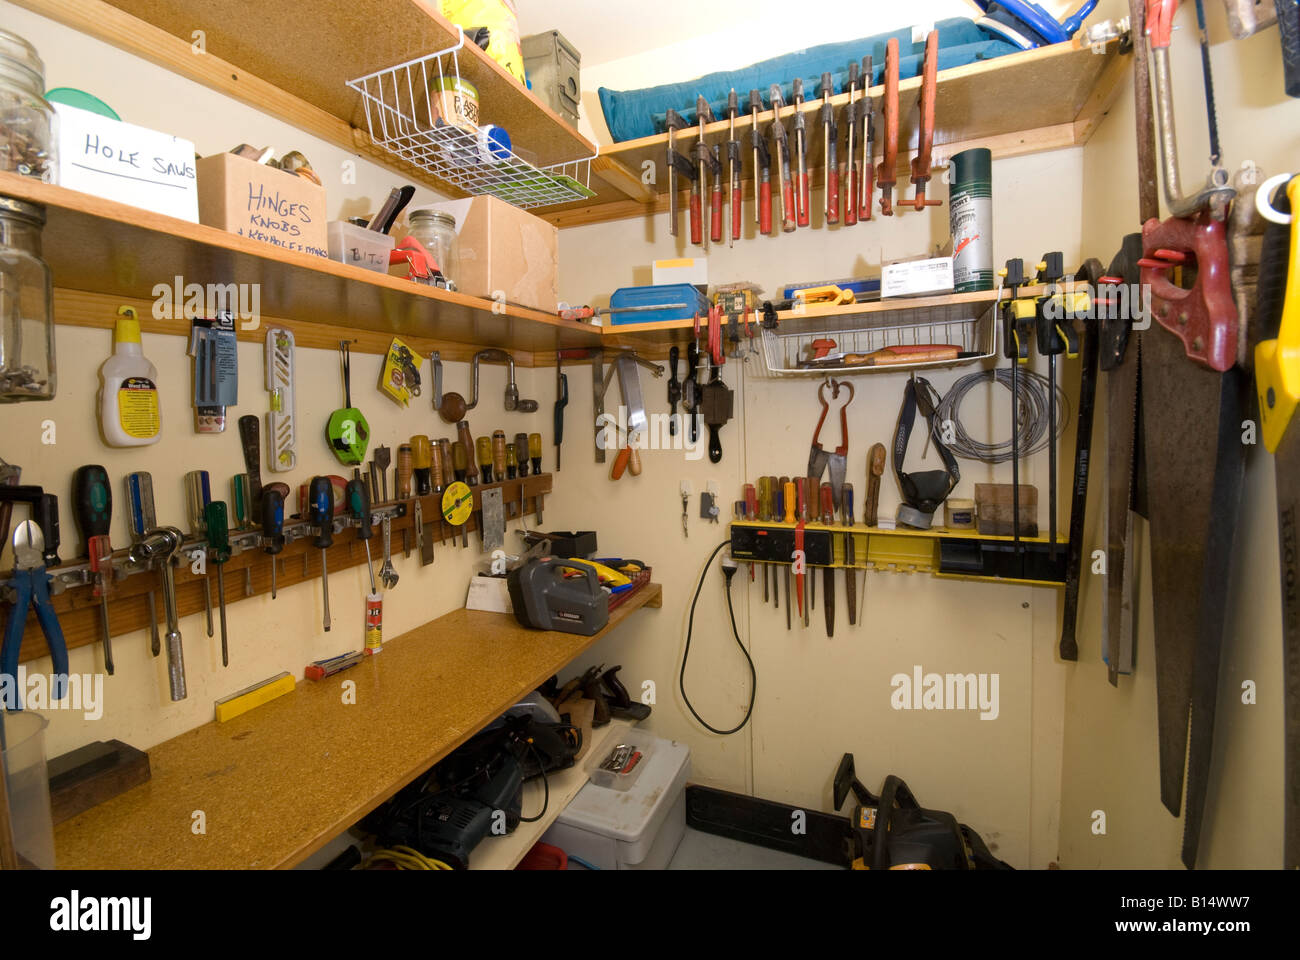 A well ordered small workshop with tools displayed in an orderly fashion Stock Photo